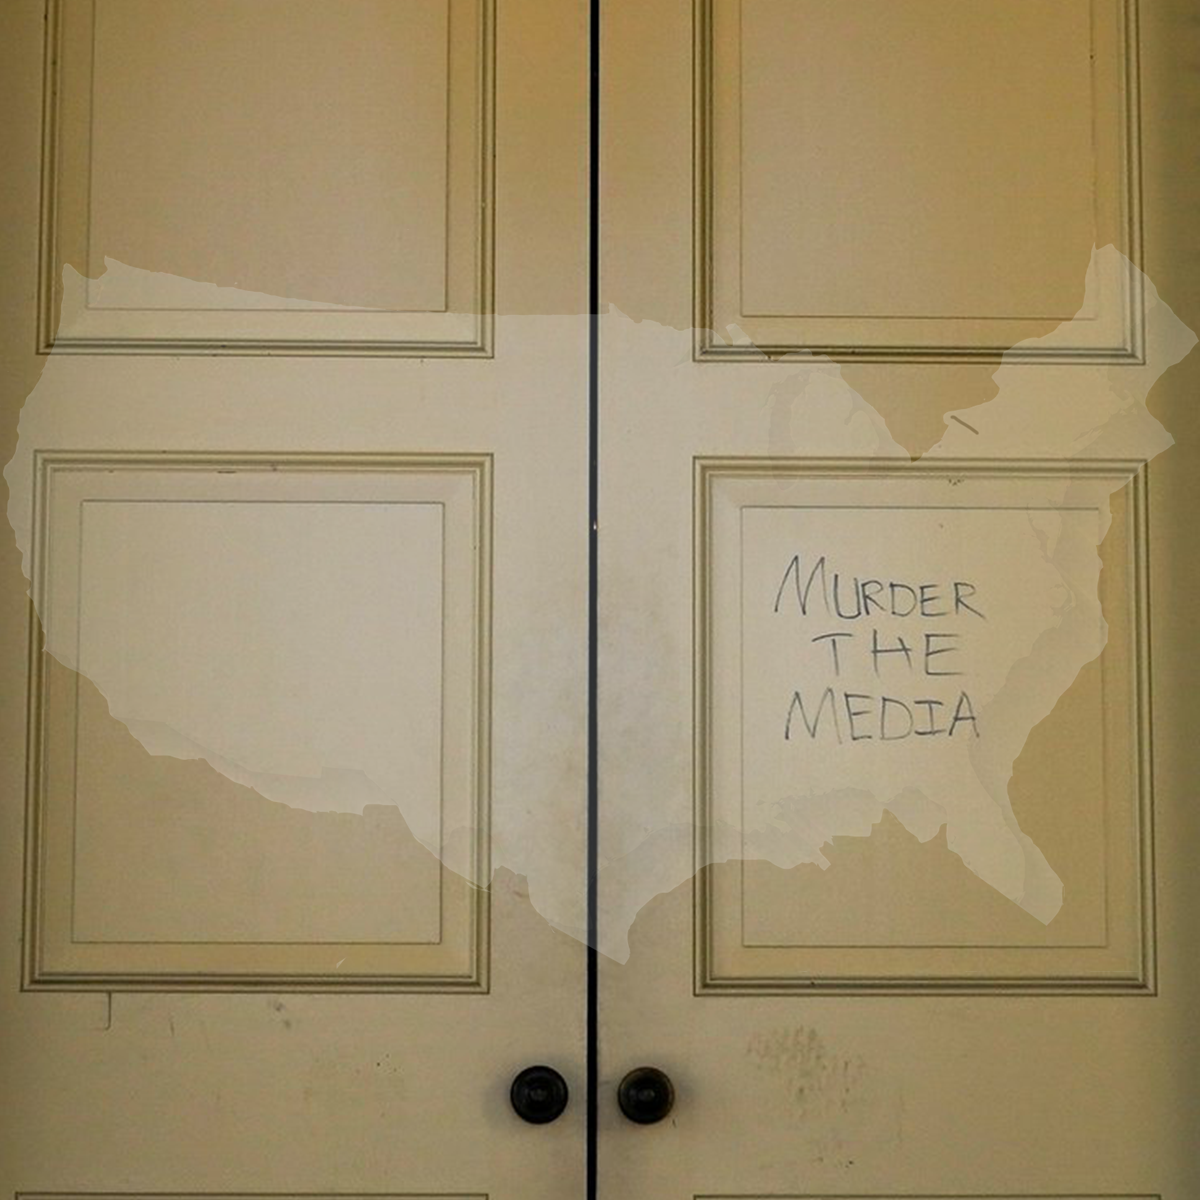 A door to the US Capitol building on Jan 6th, 2021, when it was overrun by insurrectionists trying to stop the certification of President Joe Biden. On the door is scrawled in large crude letters: MURDER THE MEDIA. A semi-transparent U.S. map is overlaid on the door. Photograph by Erin Scott/Reuters, overlay by Lisa R. Cohen.